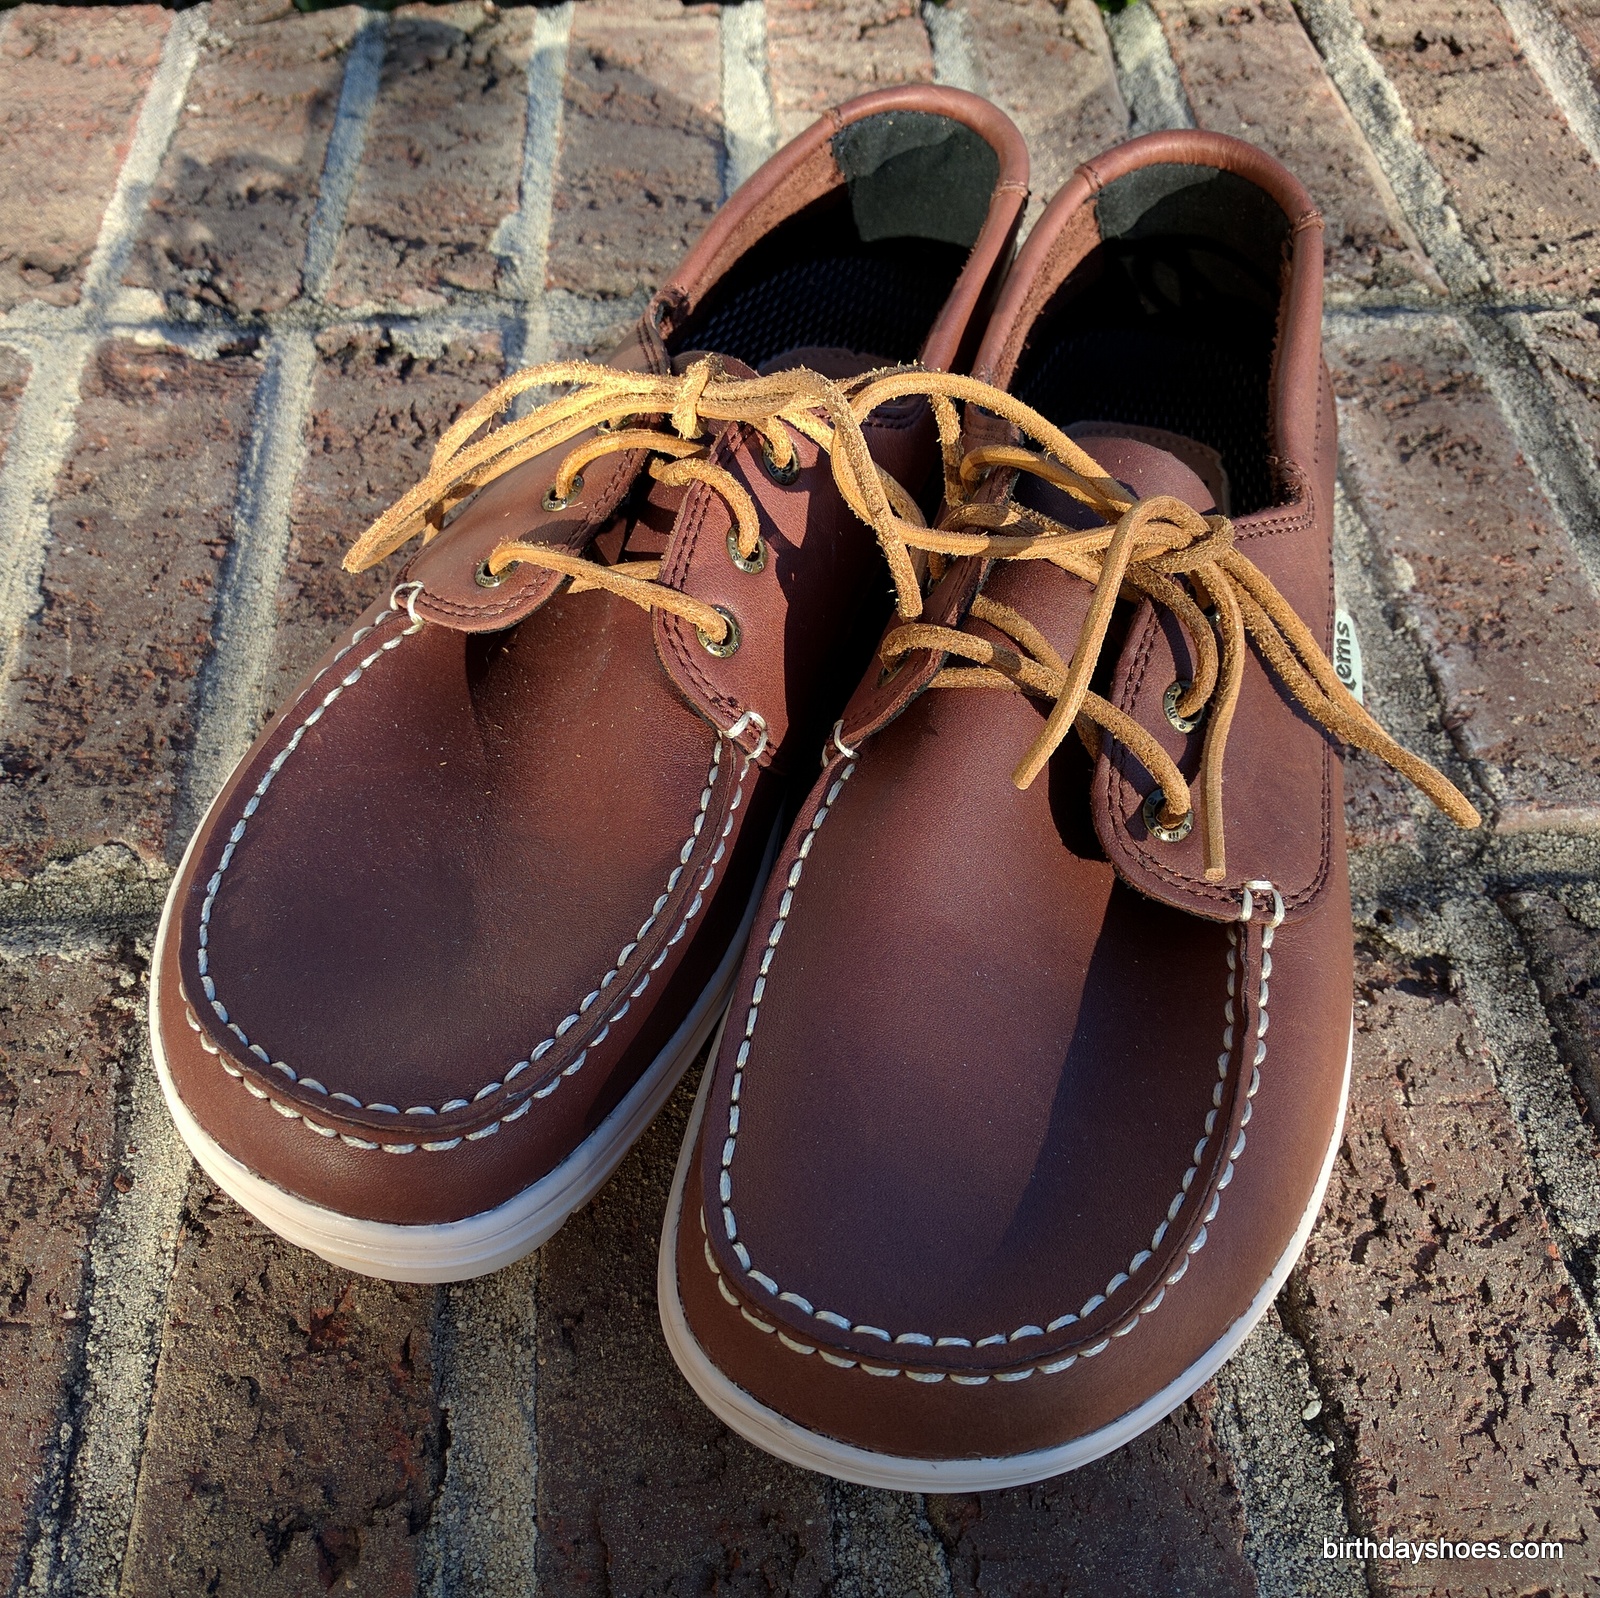 Review Lems Mariner 2 (updated!) - Barefoot Boat Shoe - Birthday Shoes ...